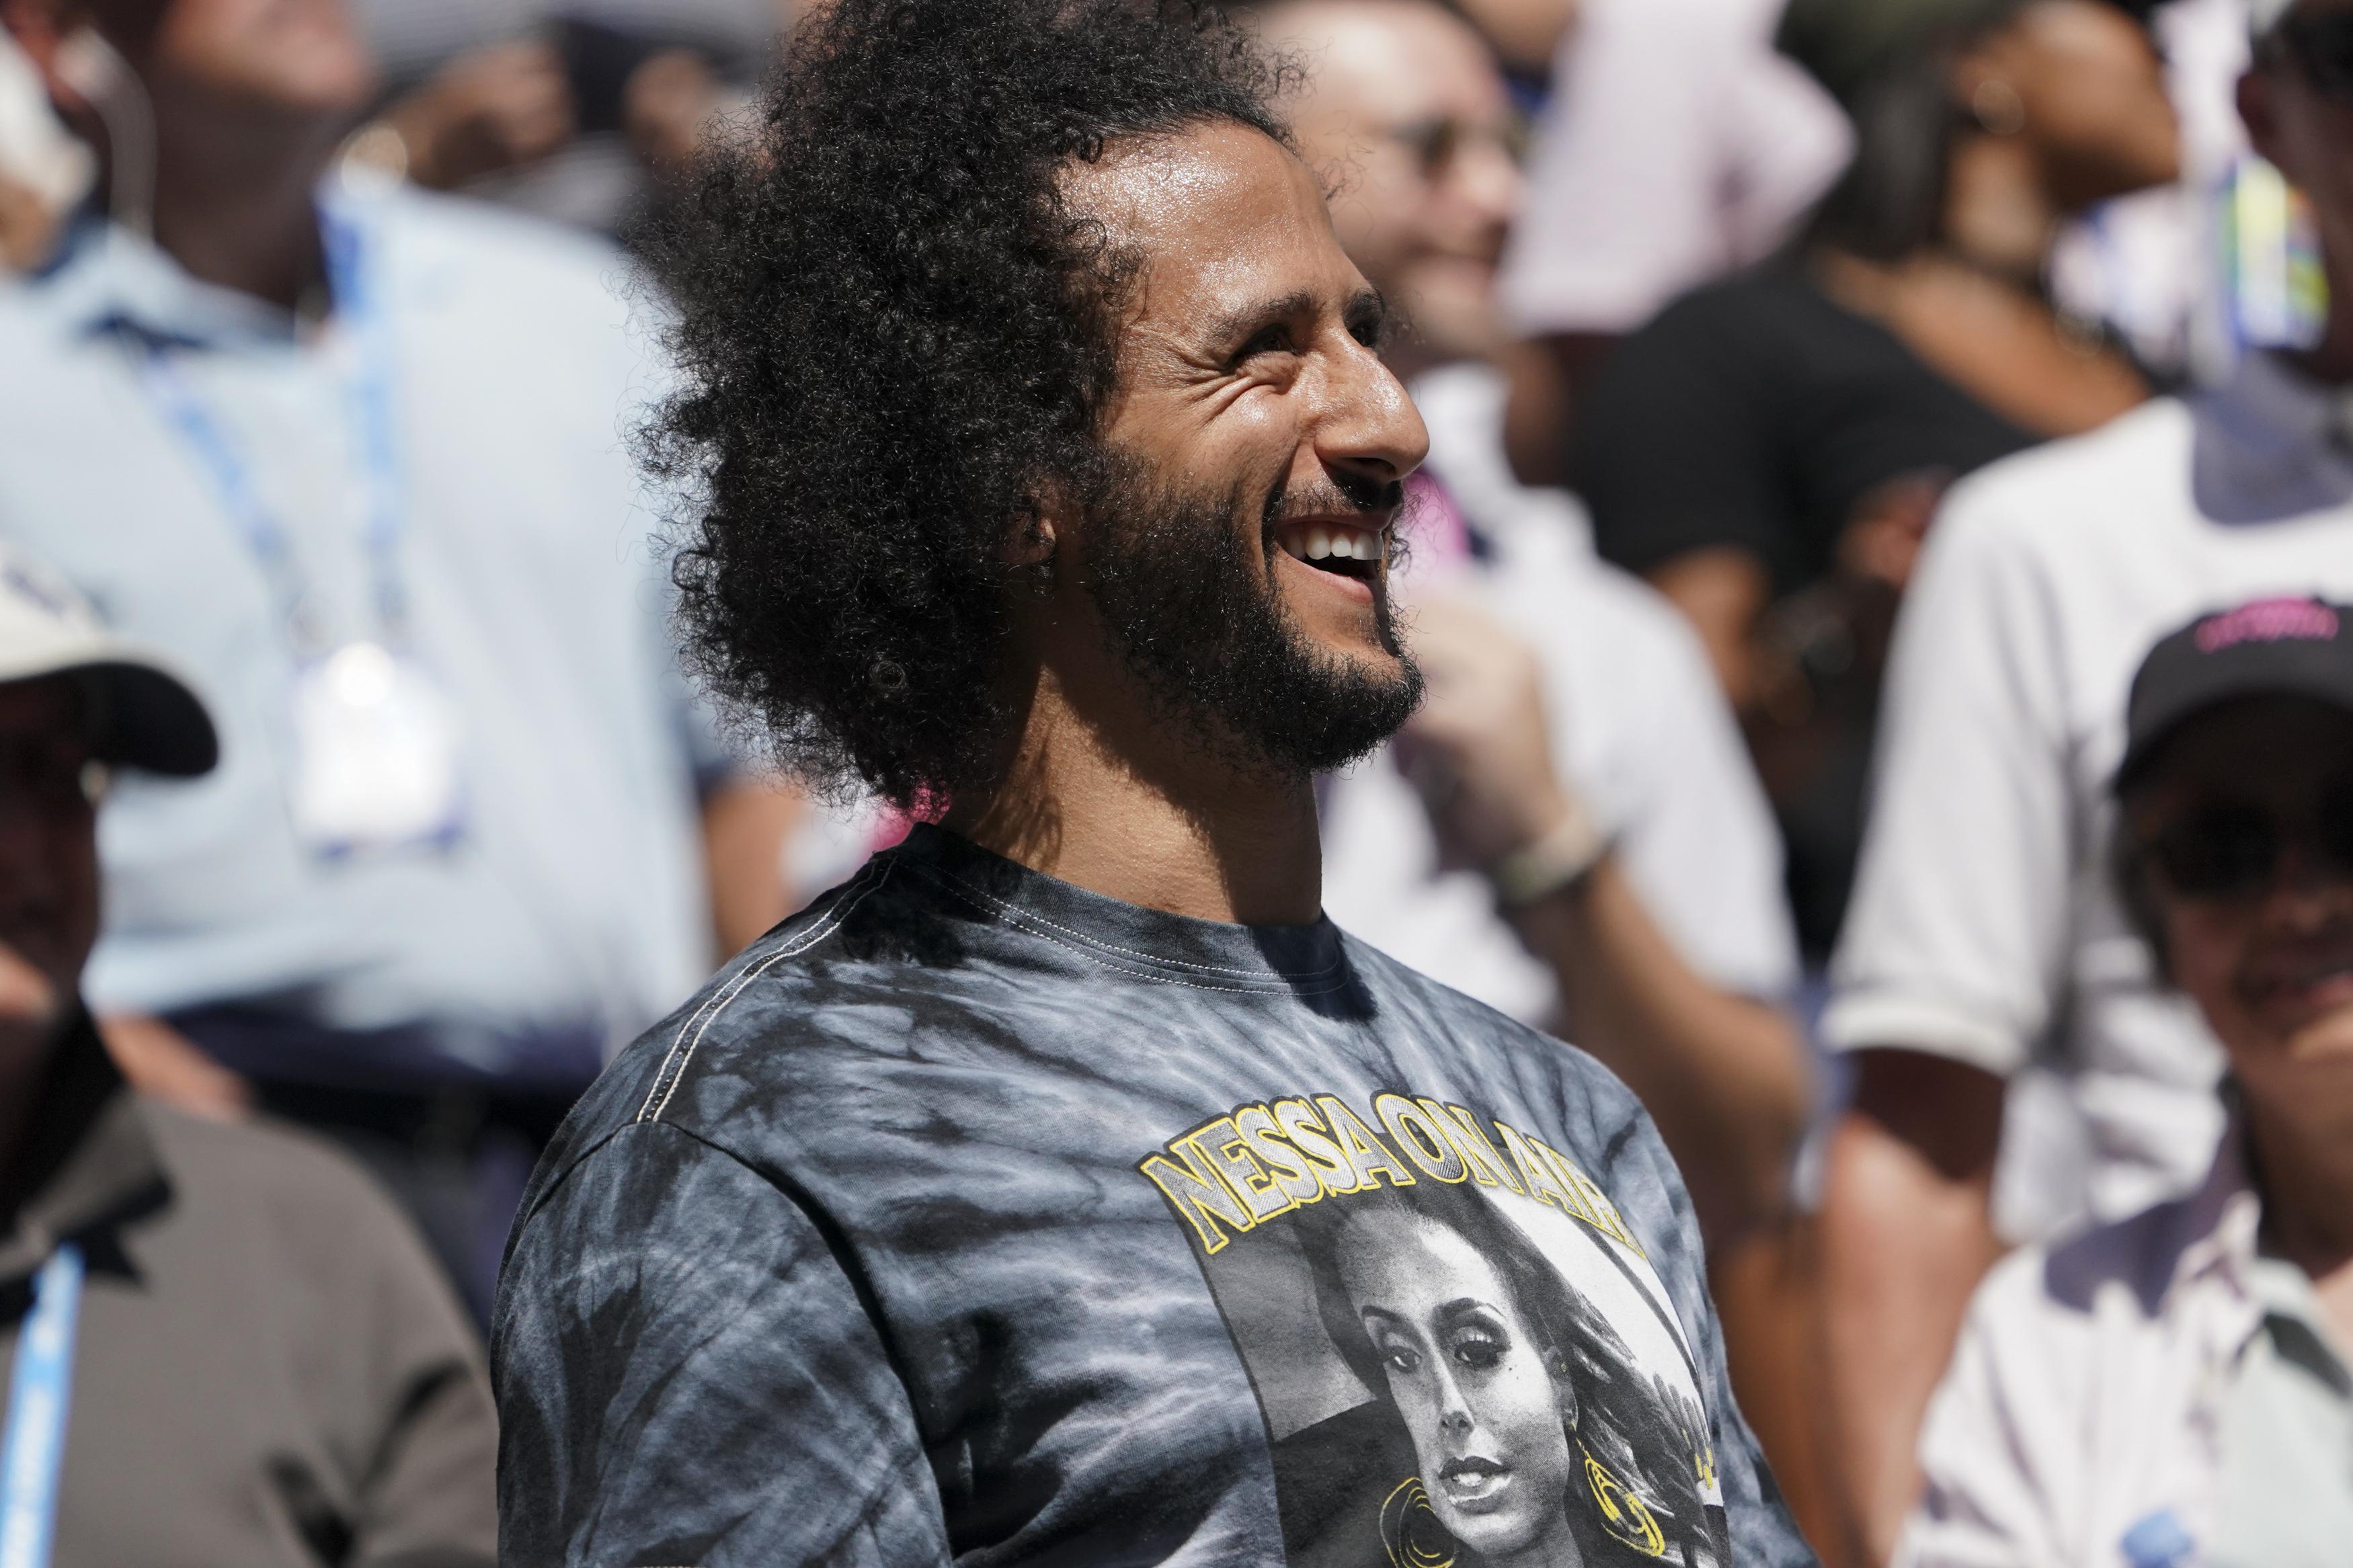 Colin Kaepernick smiles while in the stands at a tennis match.